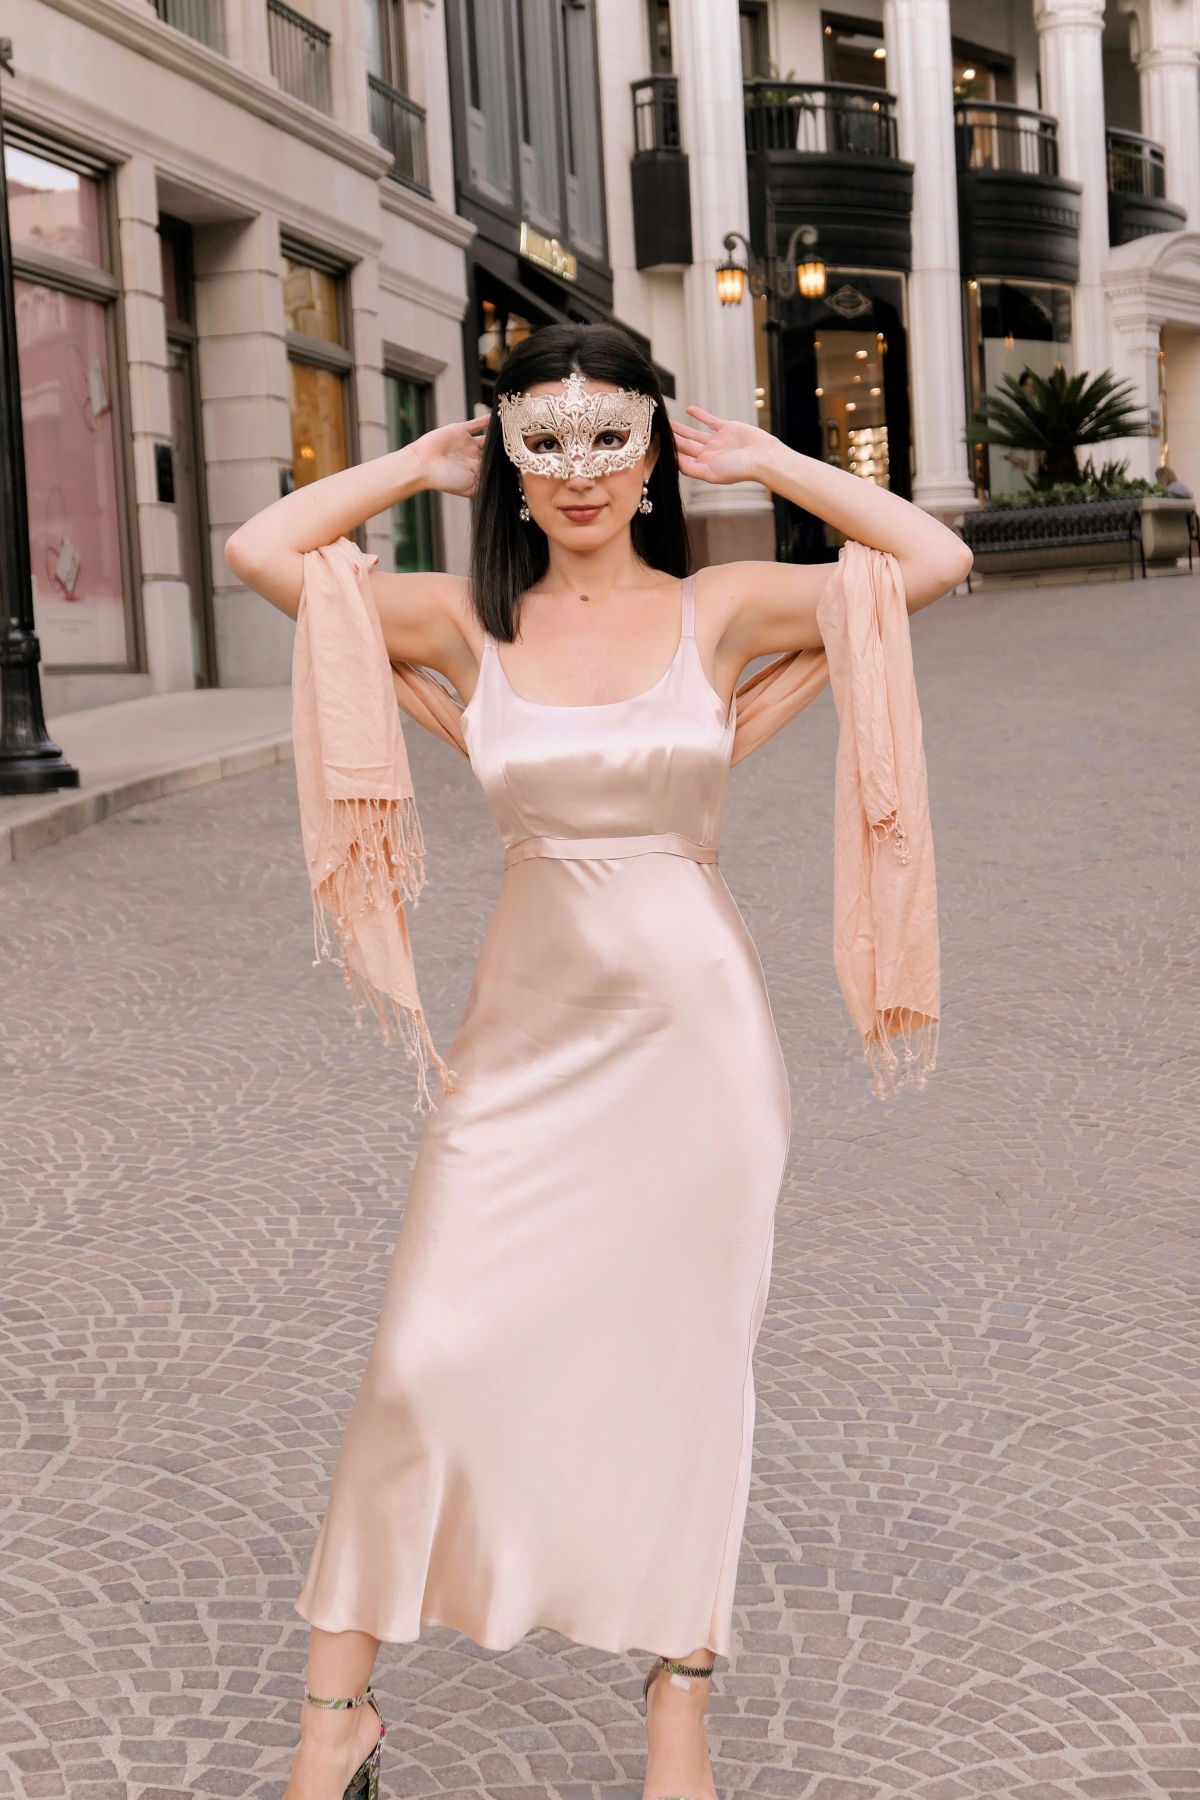 Beverly Hills, Downtown Beverly Hills, evening gown, vintage, masquerade, vintage fashion, vintage dress, satin dress, 1940s dress, Steve Madden, luxury fashion, fashion blogger, LA blogger, lifestyle blogger, lookbook, outfit of the day, look of the day, what I wore, open-toed heels, shawl